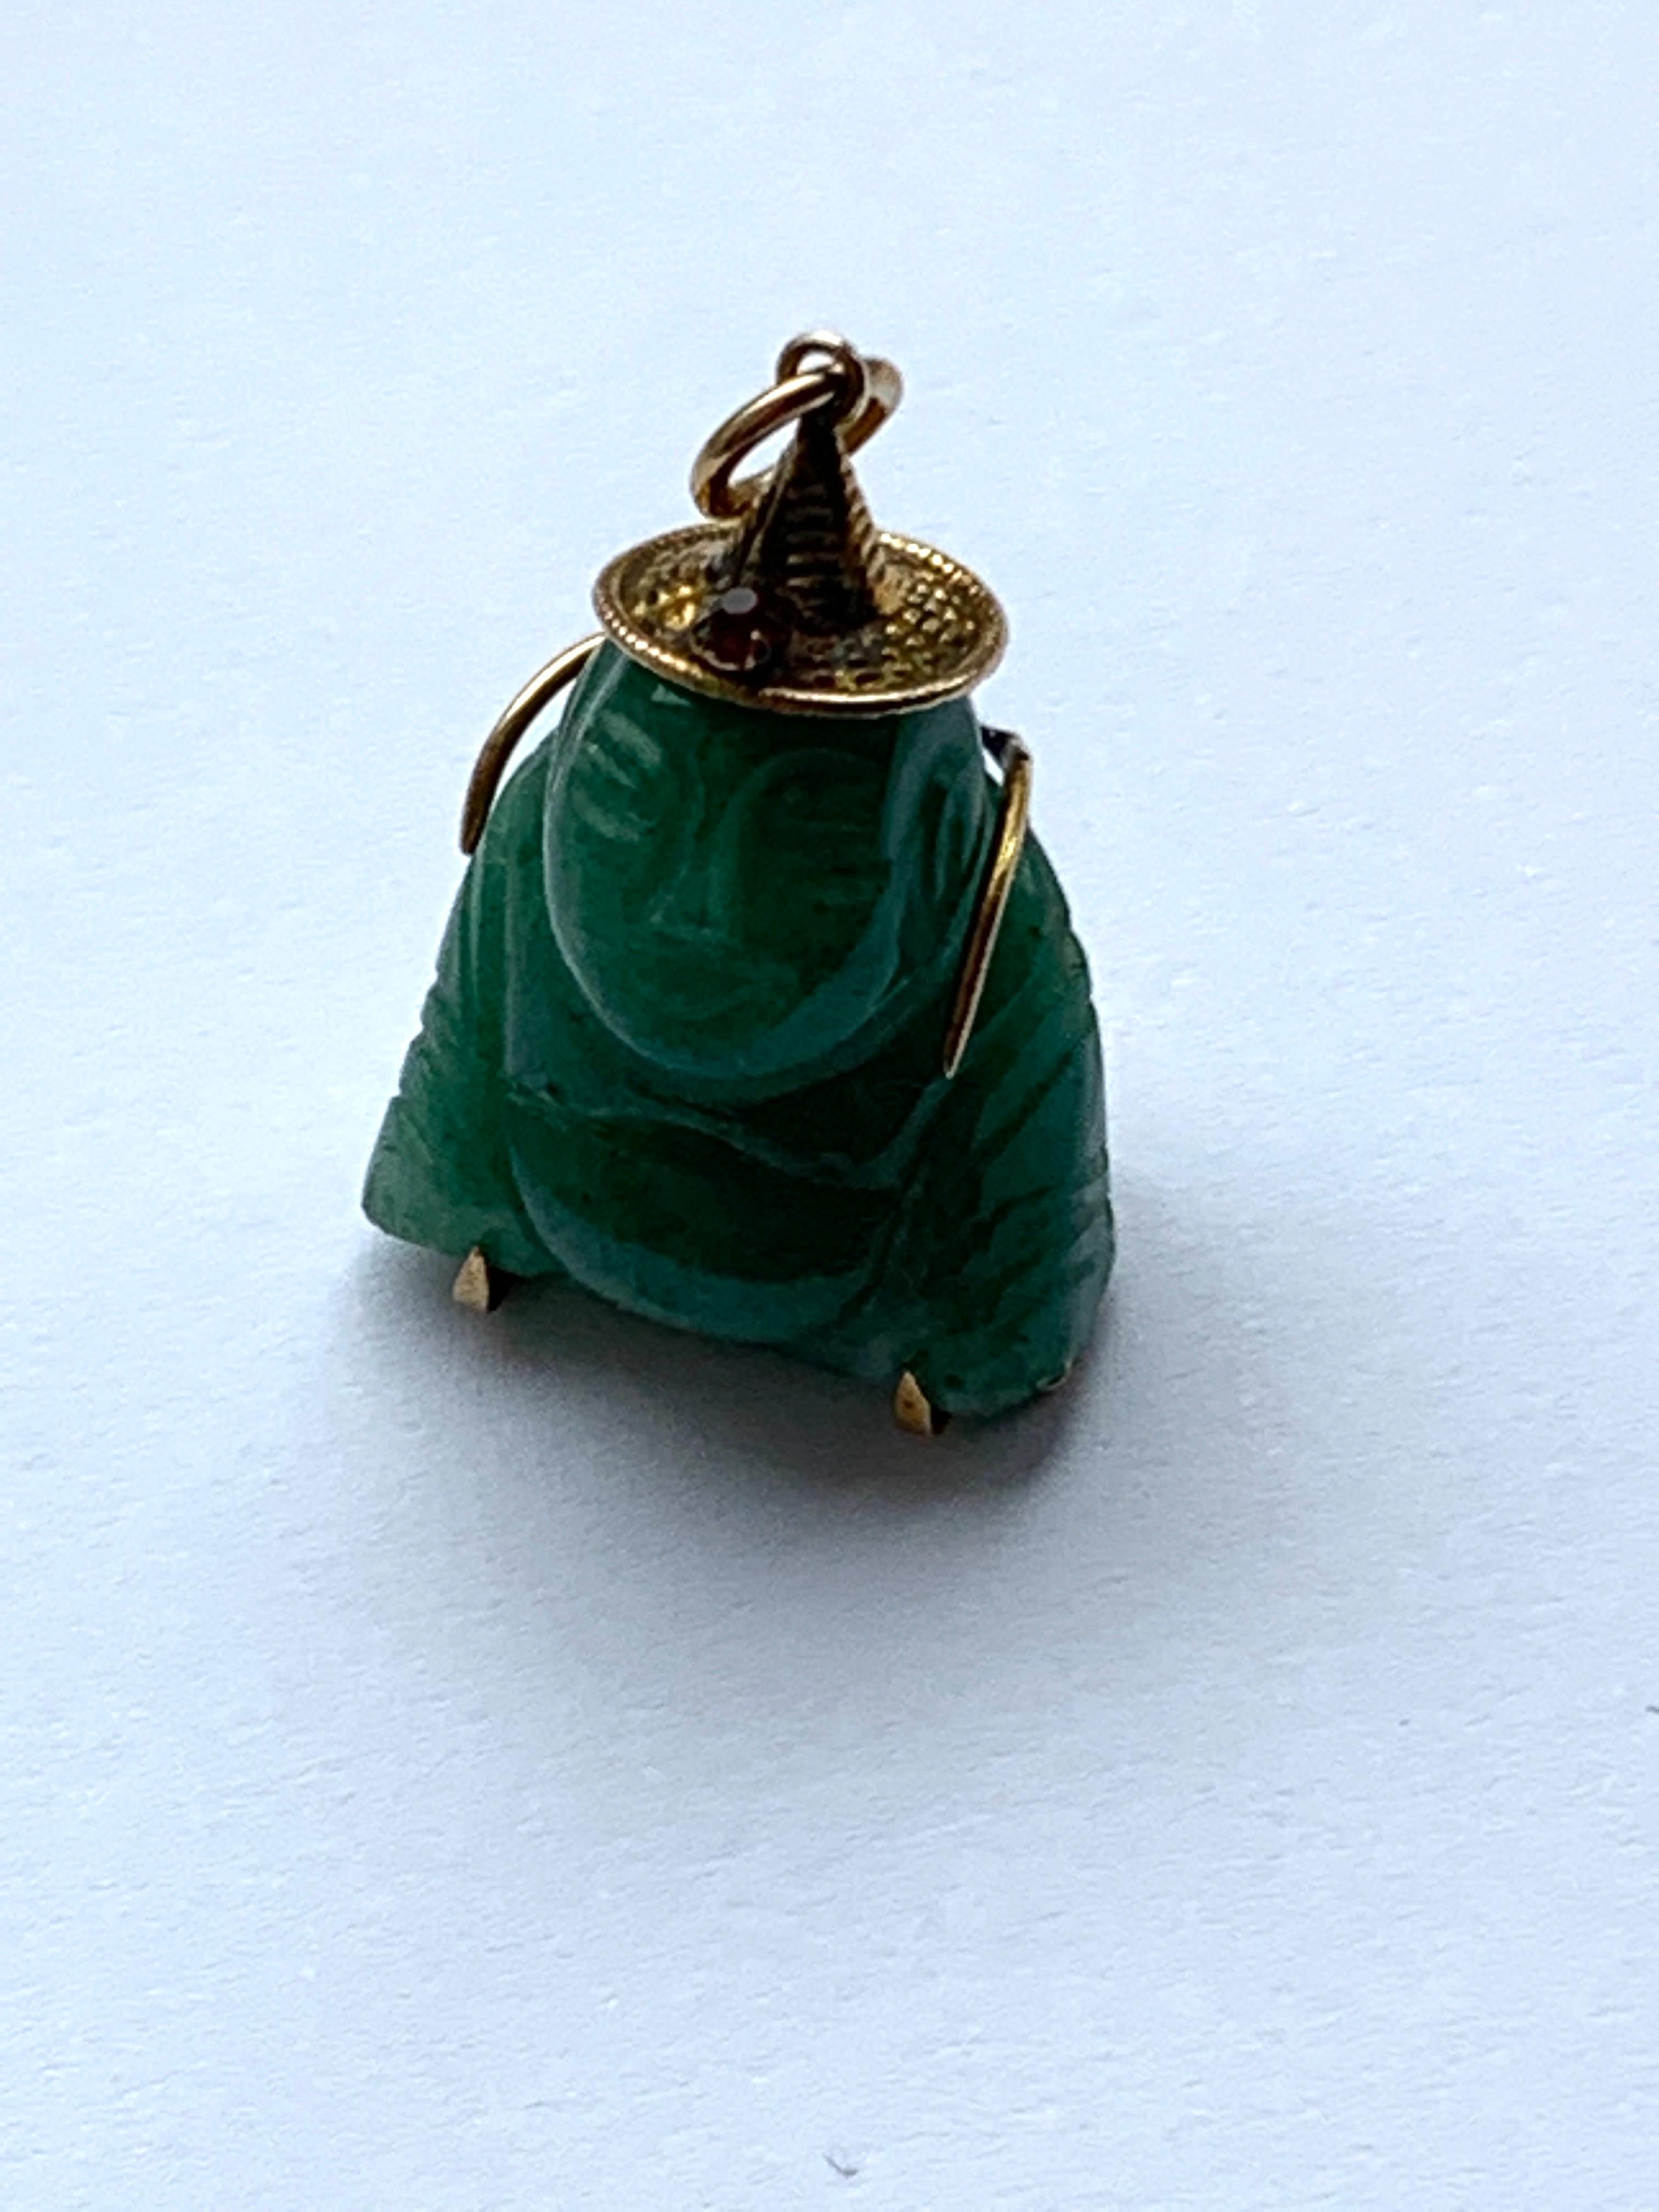 Mid Century Circa 1950
Jade Buddha Pendant
with 14ct Gold hat and Back support
Unknown red gemstone in front of hat 
Size - 3cm x 2cm
(cm = centimeters)
Stamped - 14k (fading mark)
Weight - 9.17 grams